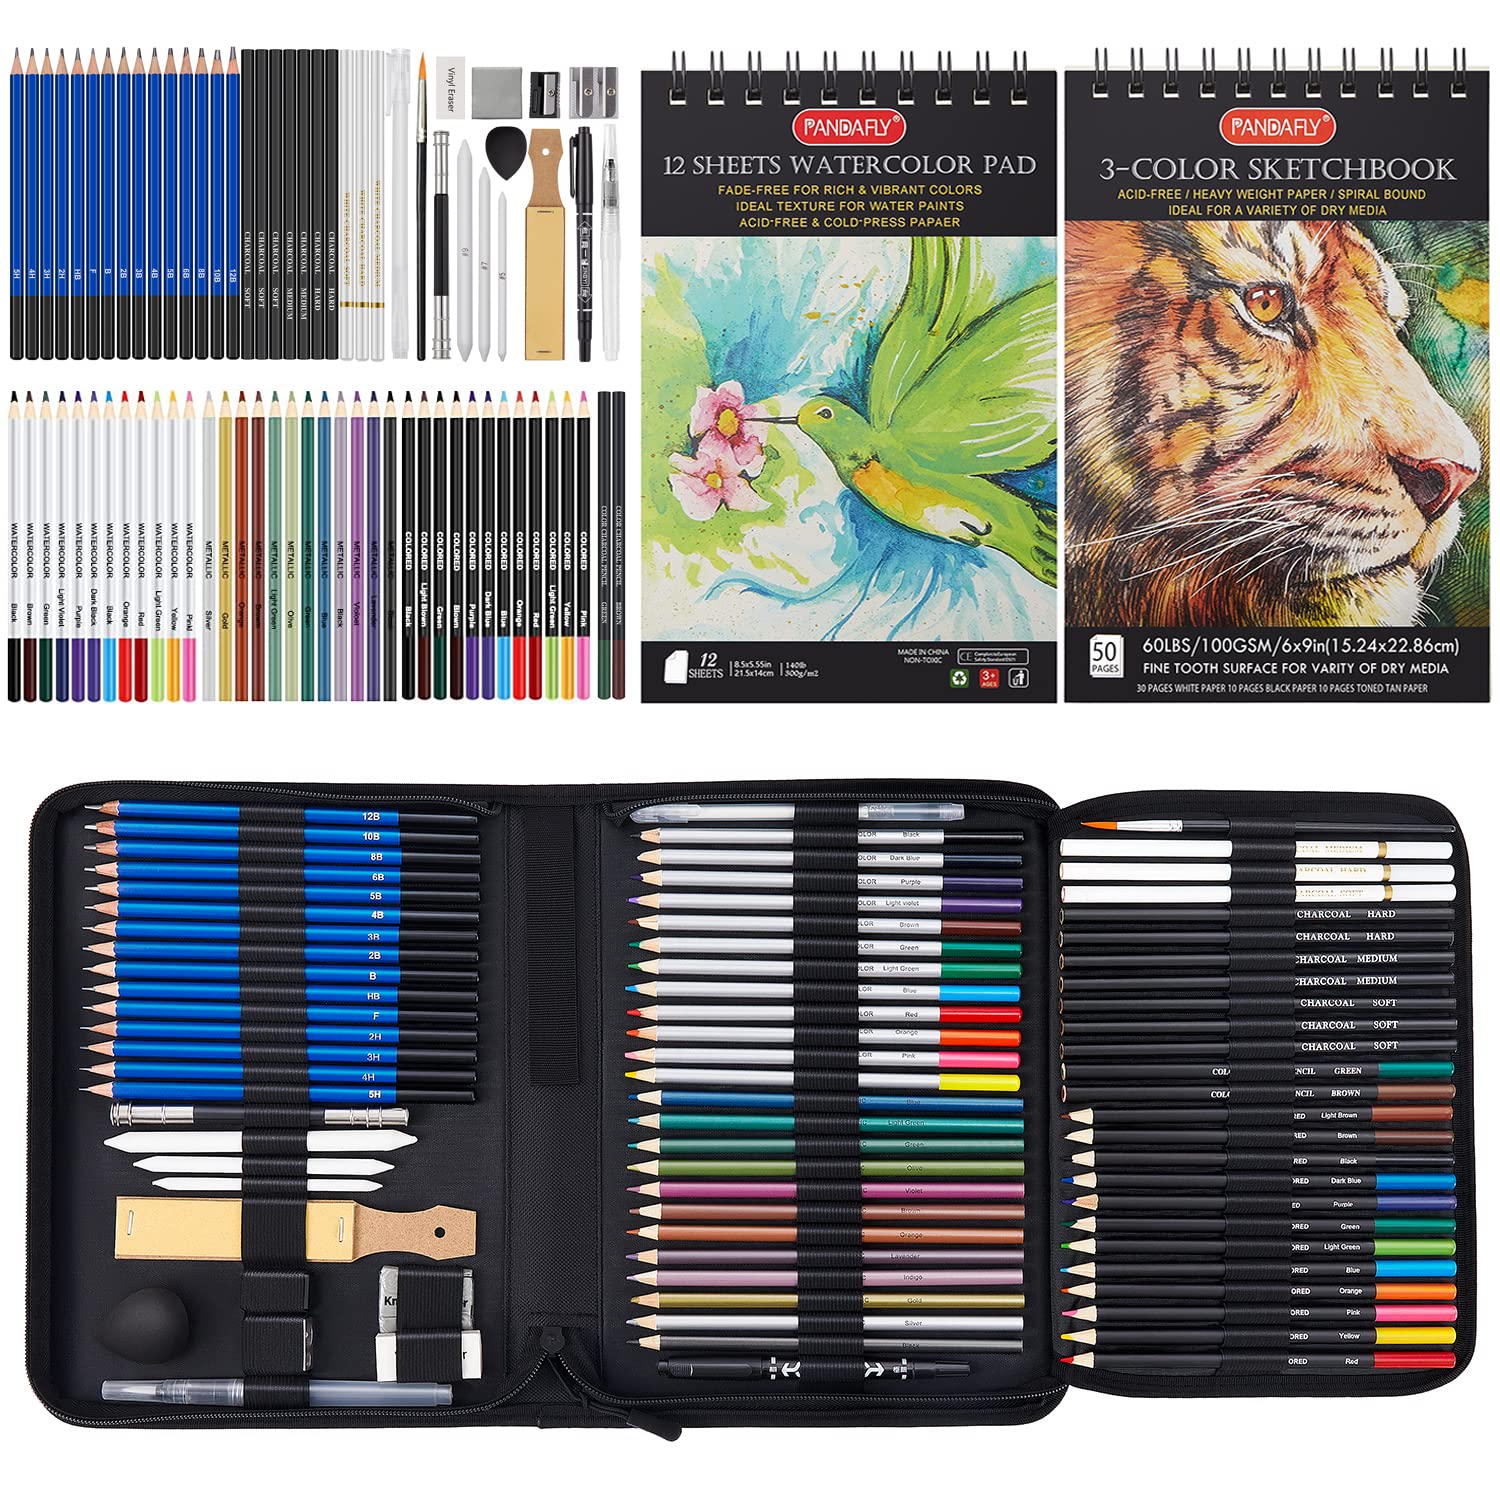 Amazon.com: Mxculior 71-Piece Art Supplies -Sketch Set,Painting,Coloring  and Drawing Pencils Set with Extra Art Kits for Children, Adults and  Artists : Arts, Crafts & Sewing